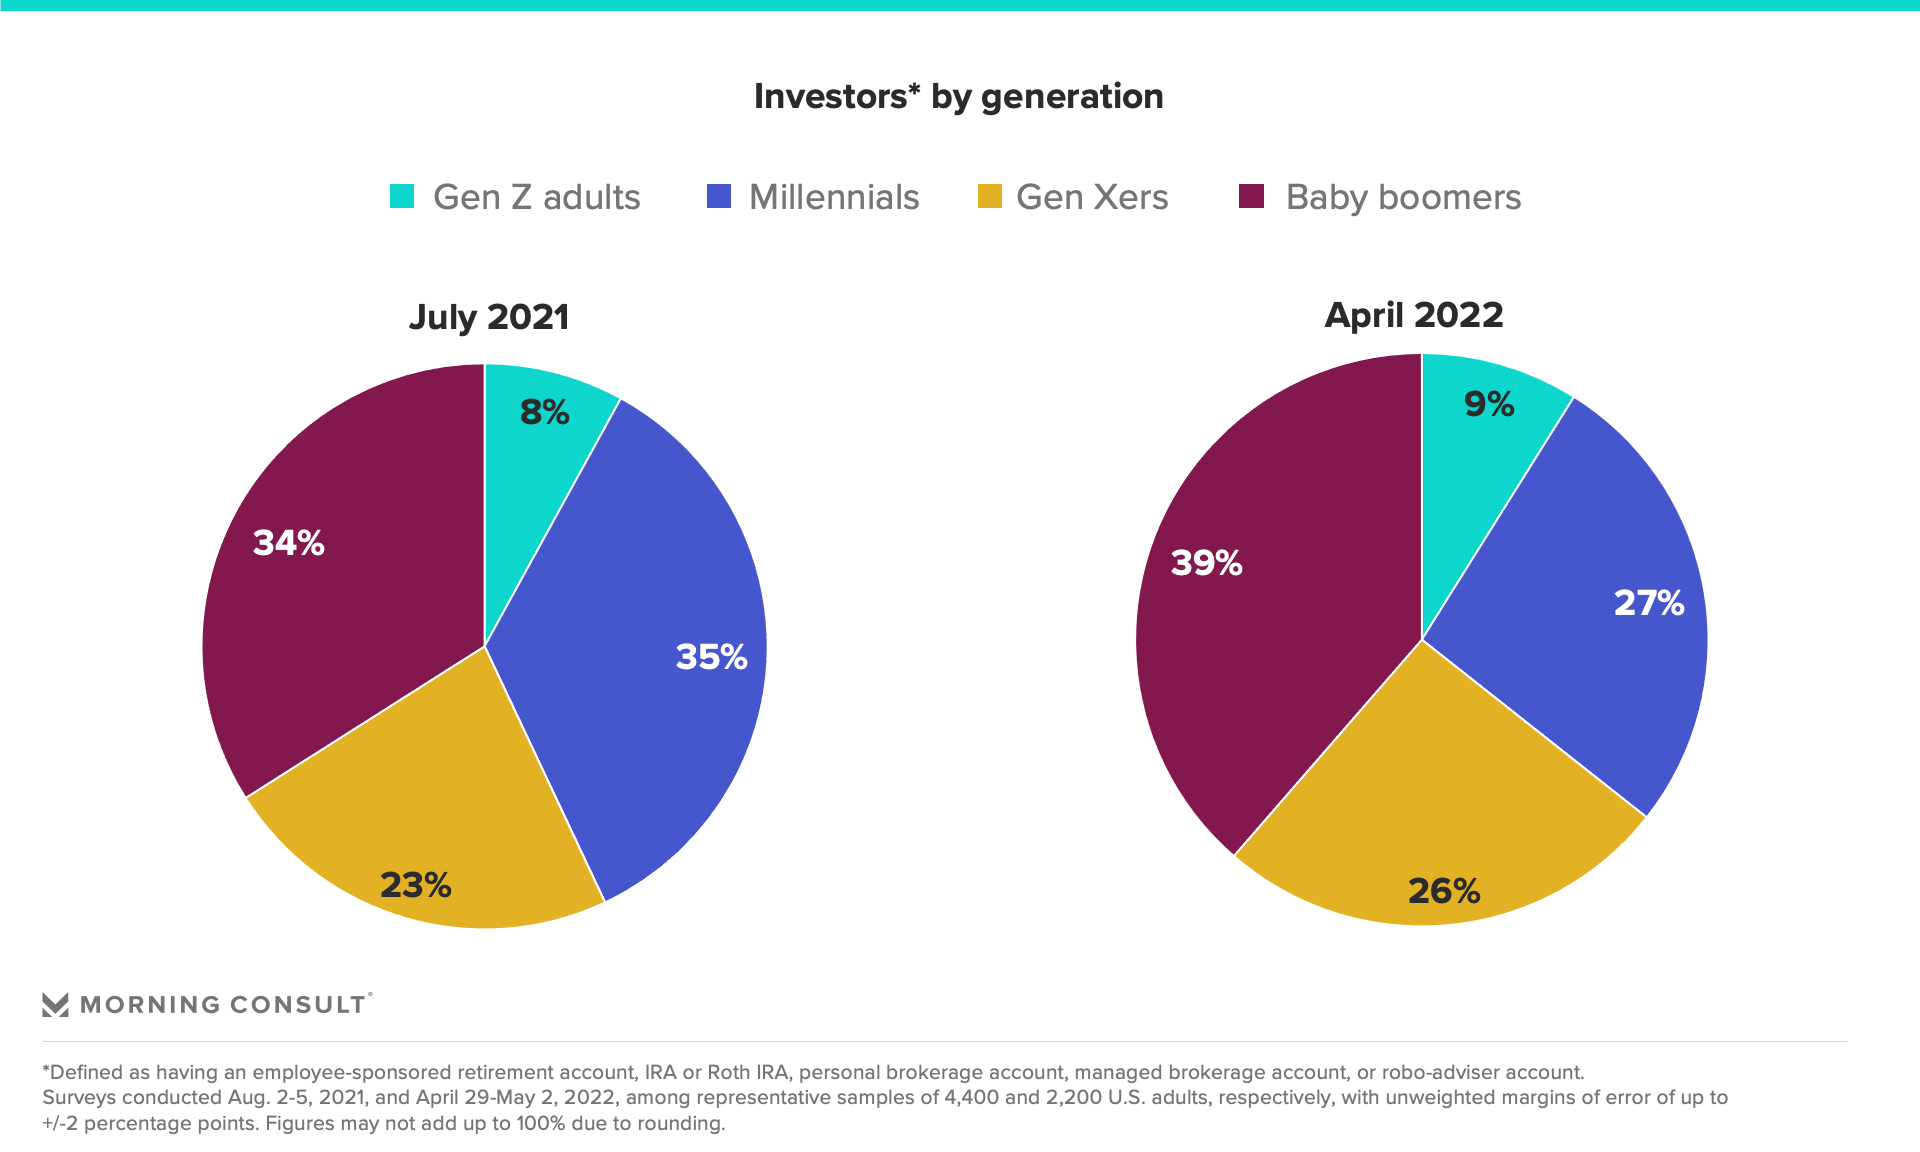 Pie charts showing the breakdown of U.S. Investors in 2021 and 2022 by generation